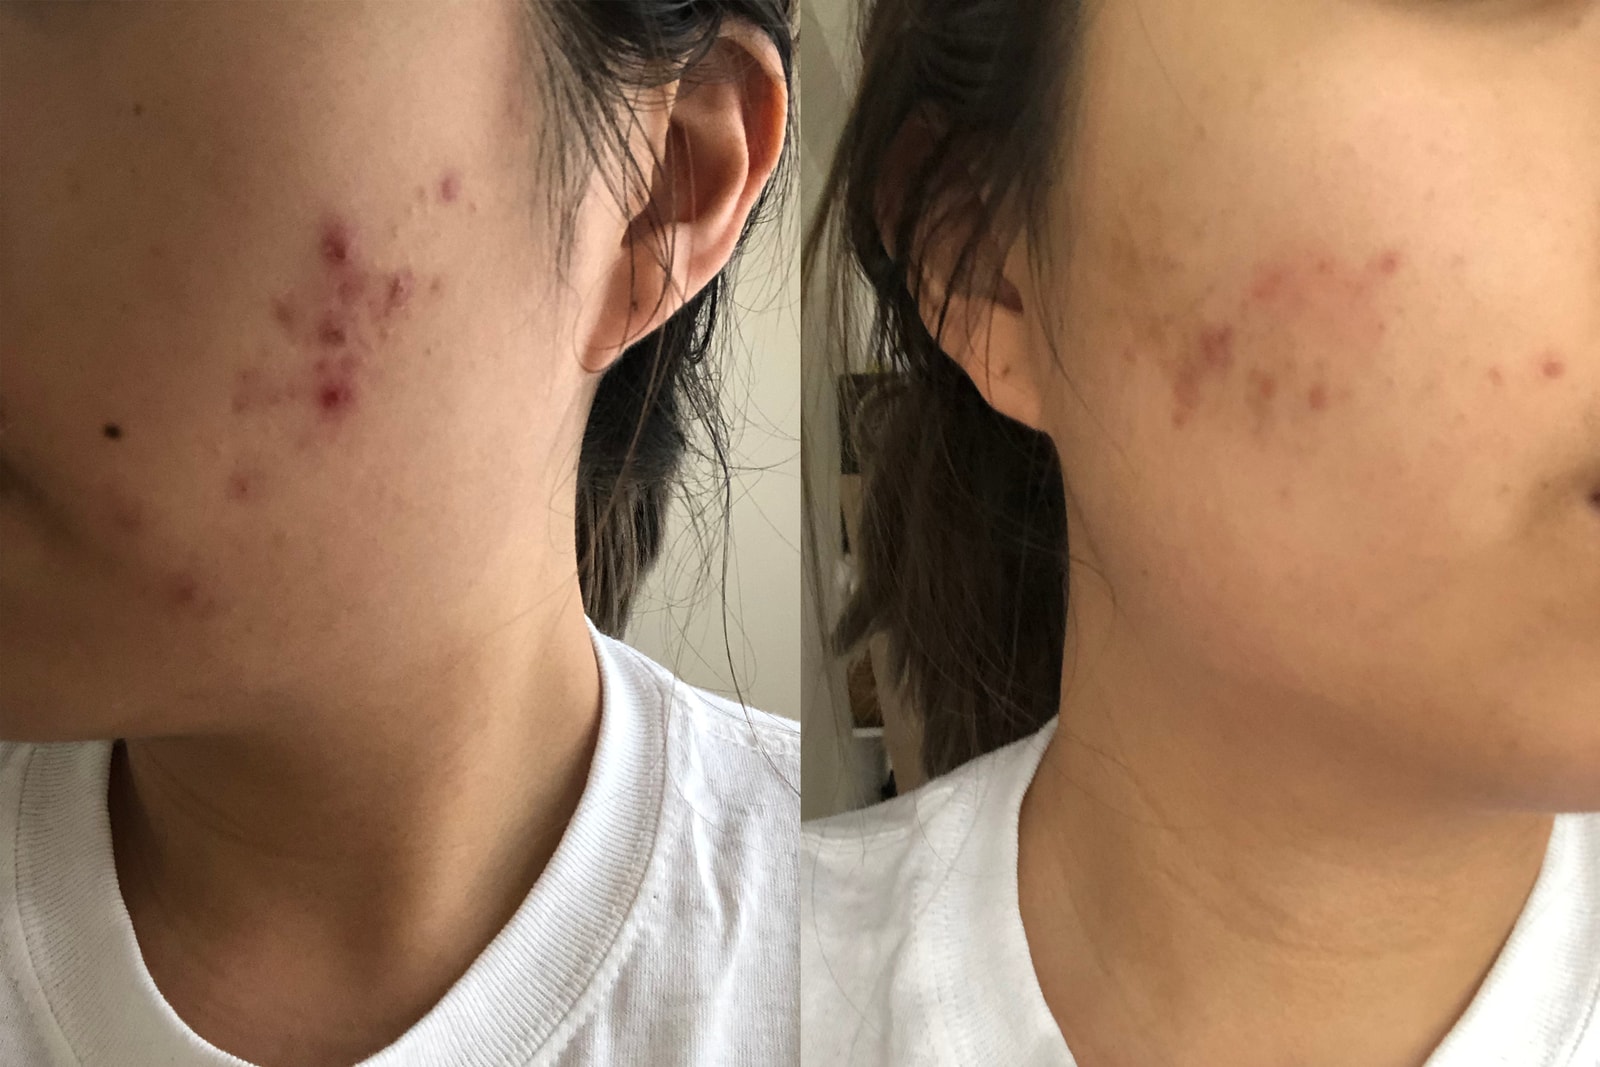 curology superbottle cleanser moisturizer review trial effects results pictures hormonal acne skincare clear skin treatment face wrinkles scars 